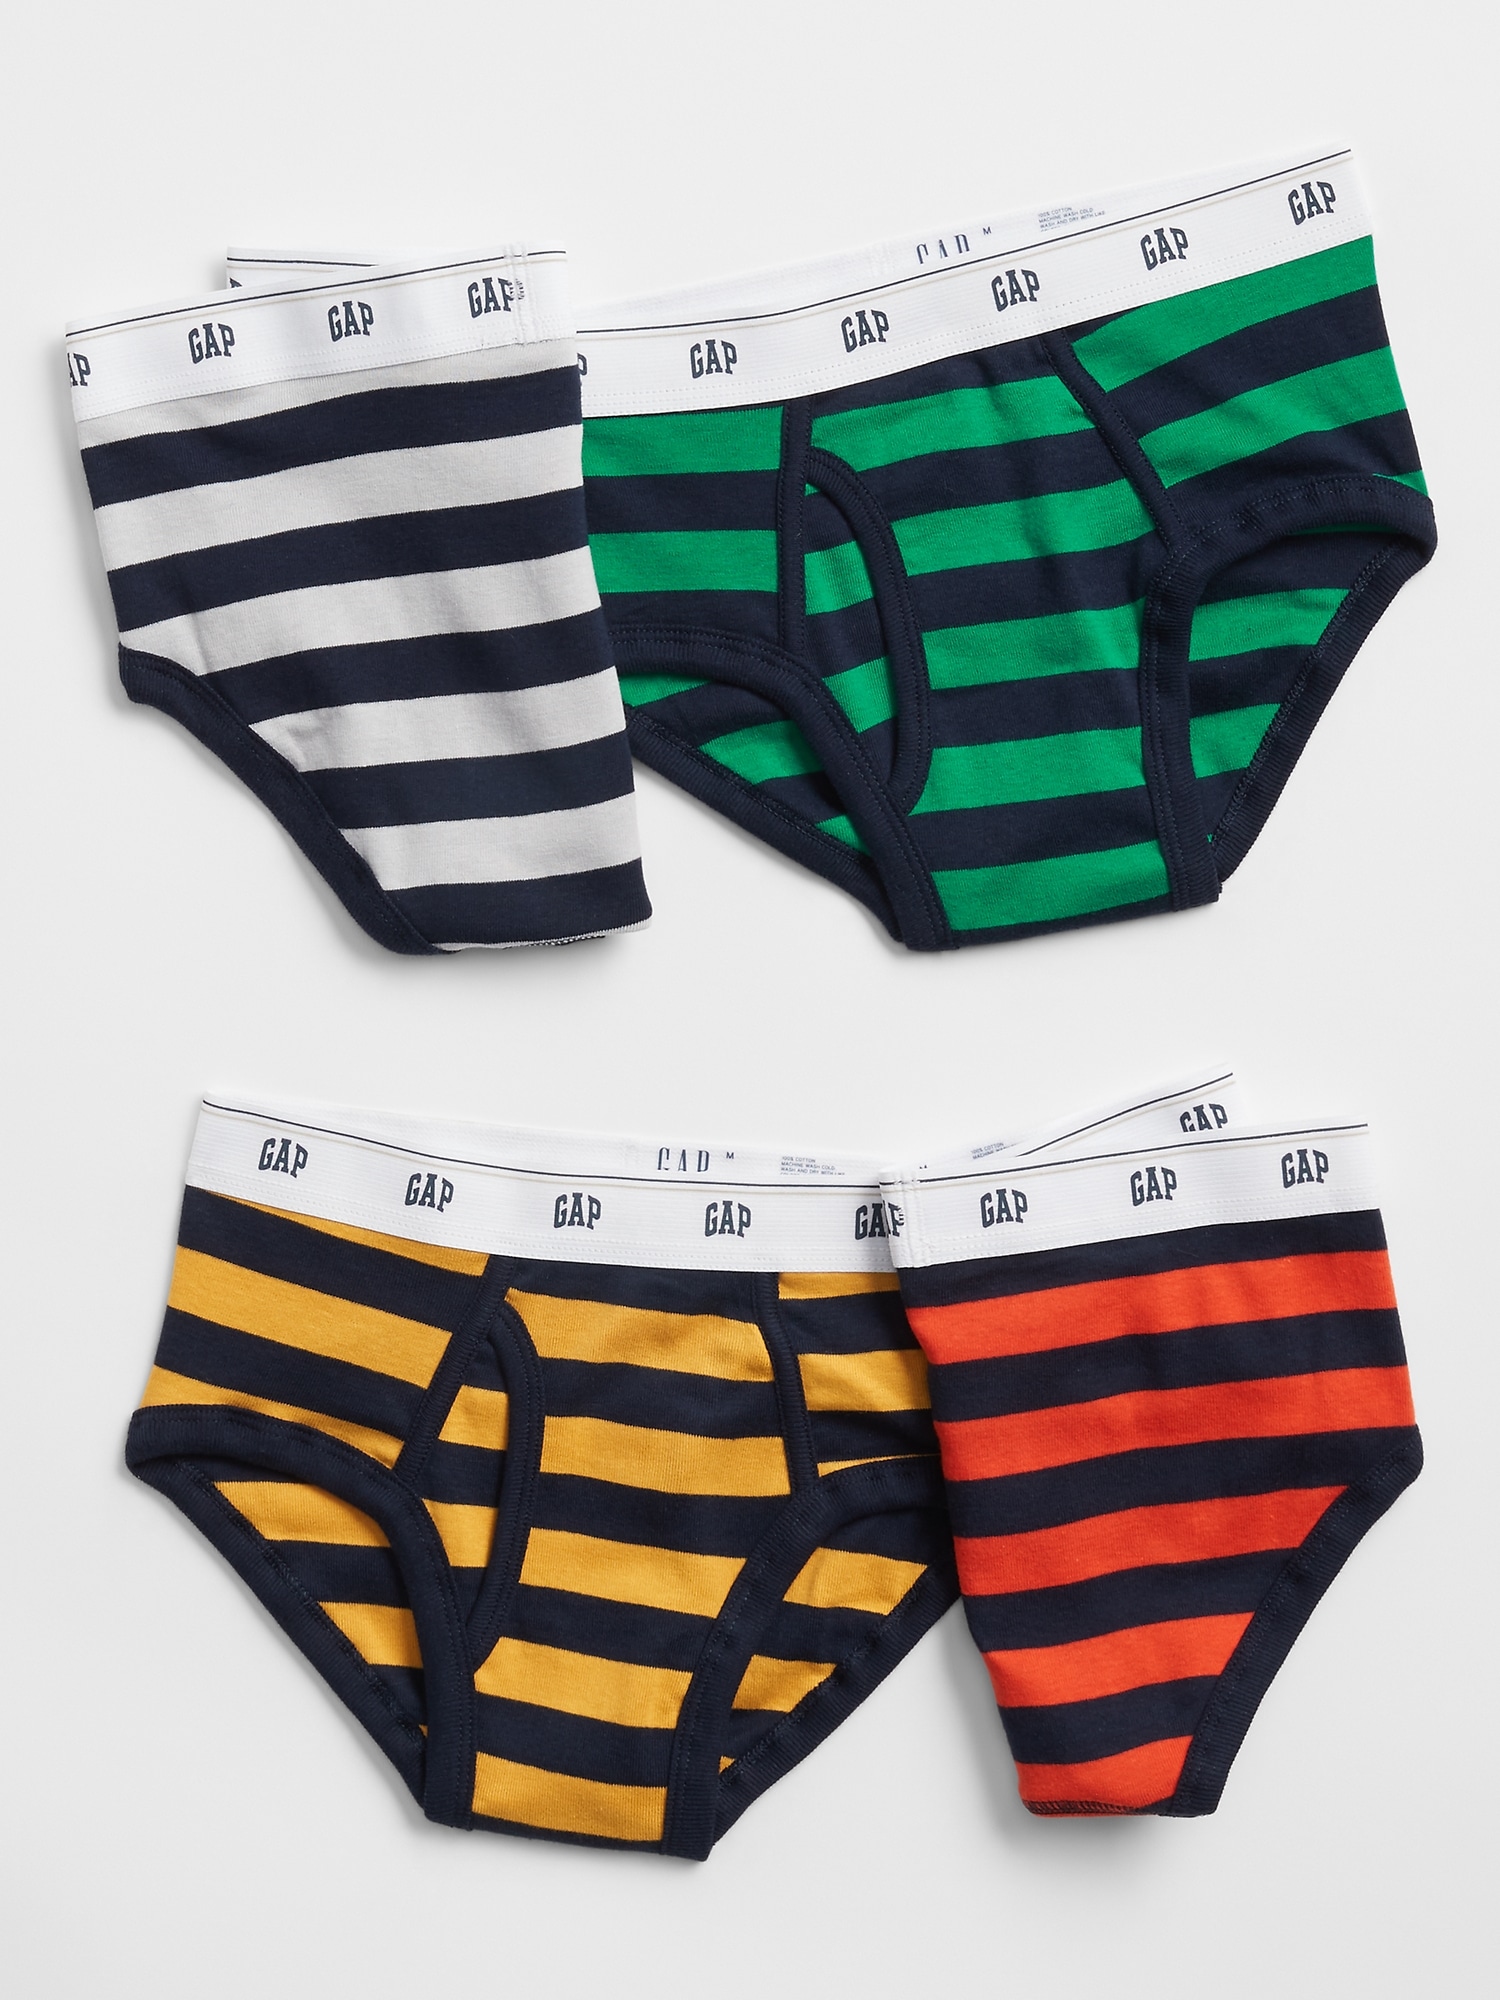 Ding-dong Toddler Kids Boys Striped Boxer Brief Cotton Underwear 4 Pack